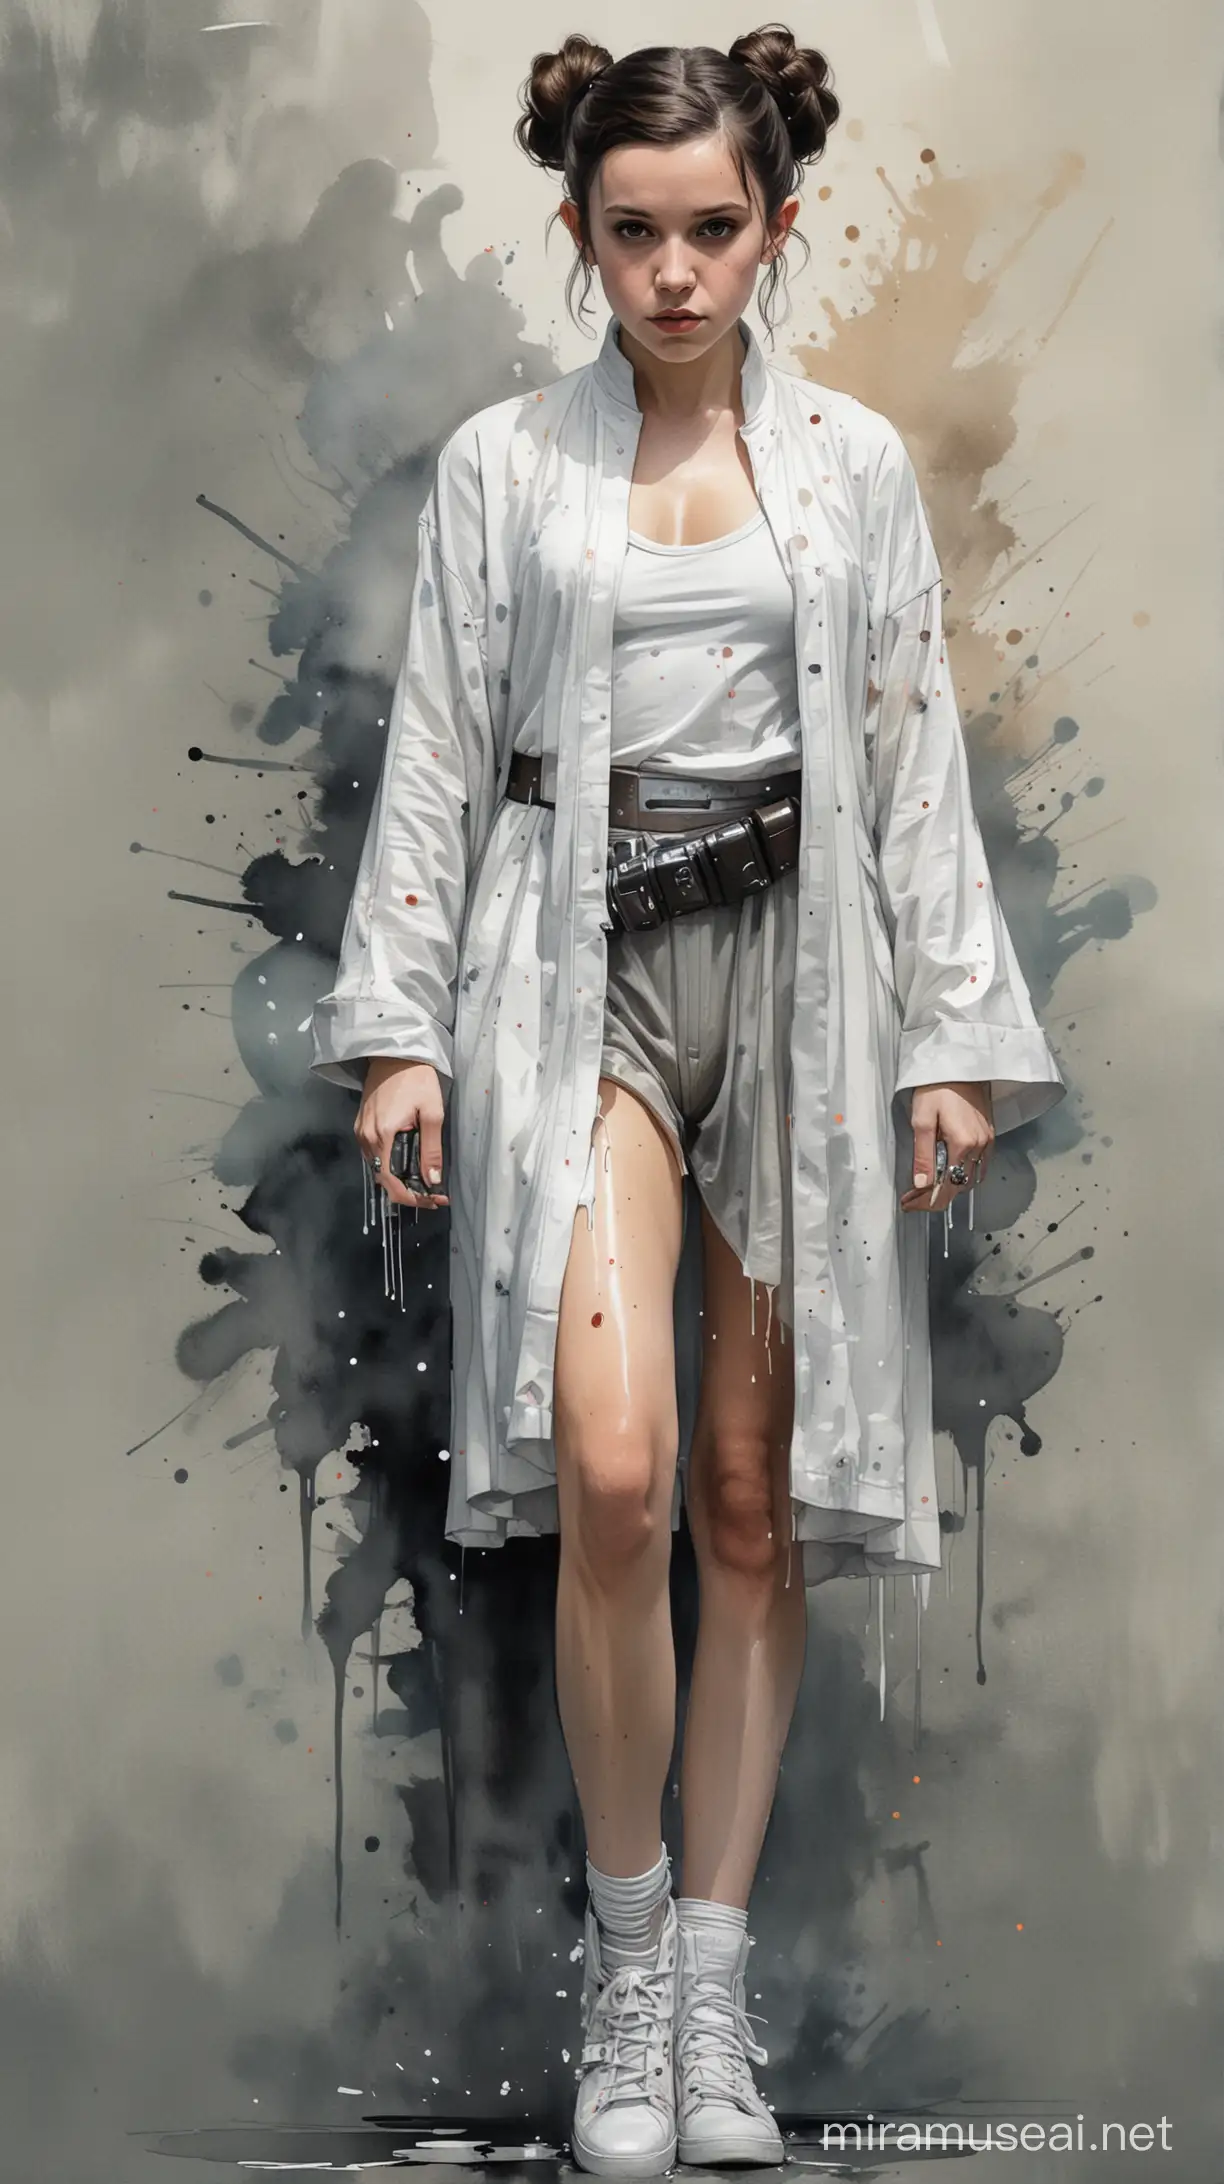 Alex Maleev illustration depicting young Millie Bobby Brown wearing Princess Leia attire, smooth shapely legs, messy watercolor, no distortion, gray palette, insanely high detail, very high quality, seen from above, forced perspective